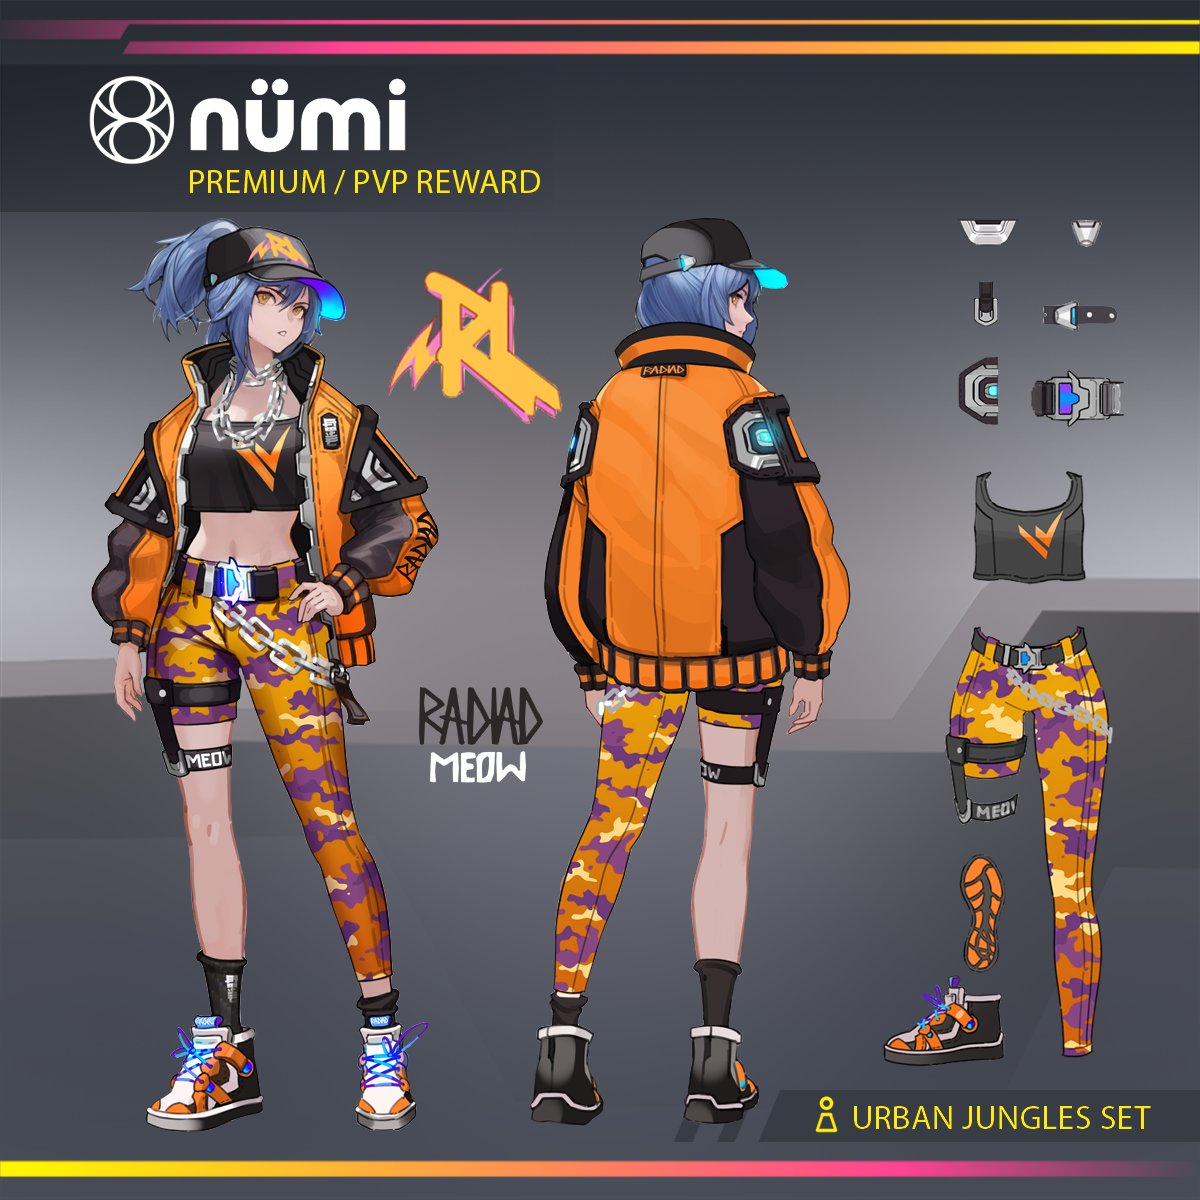 ⏳Numi Stories' PvP battle last call⌛ Don't miss your opportunity to join the PvP battle in Numi Stories before the deadline ‼ Follow the rhythm and seize the chance to win the Premium RadLad Set 🔥 🕞 Deadline: Tuesday, September 12, 2023, 19:59 UTC 🏆 How to join…